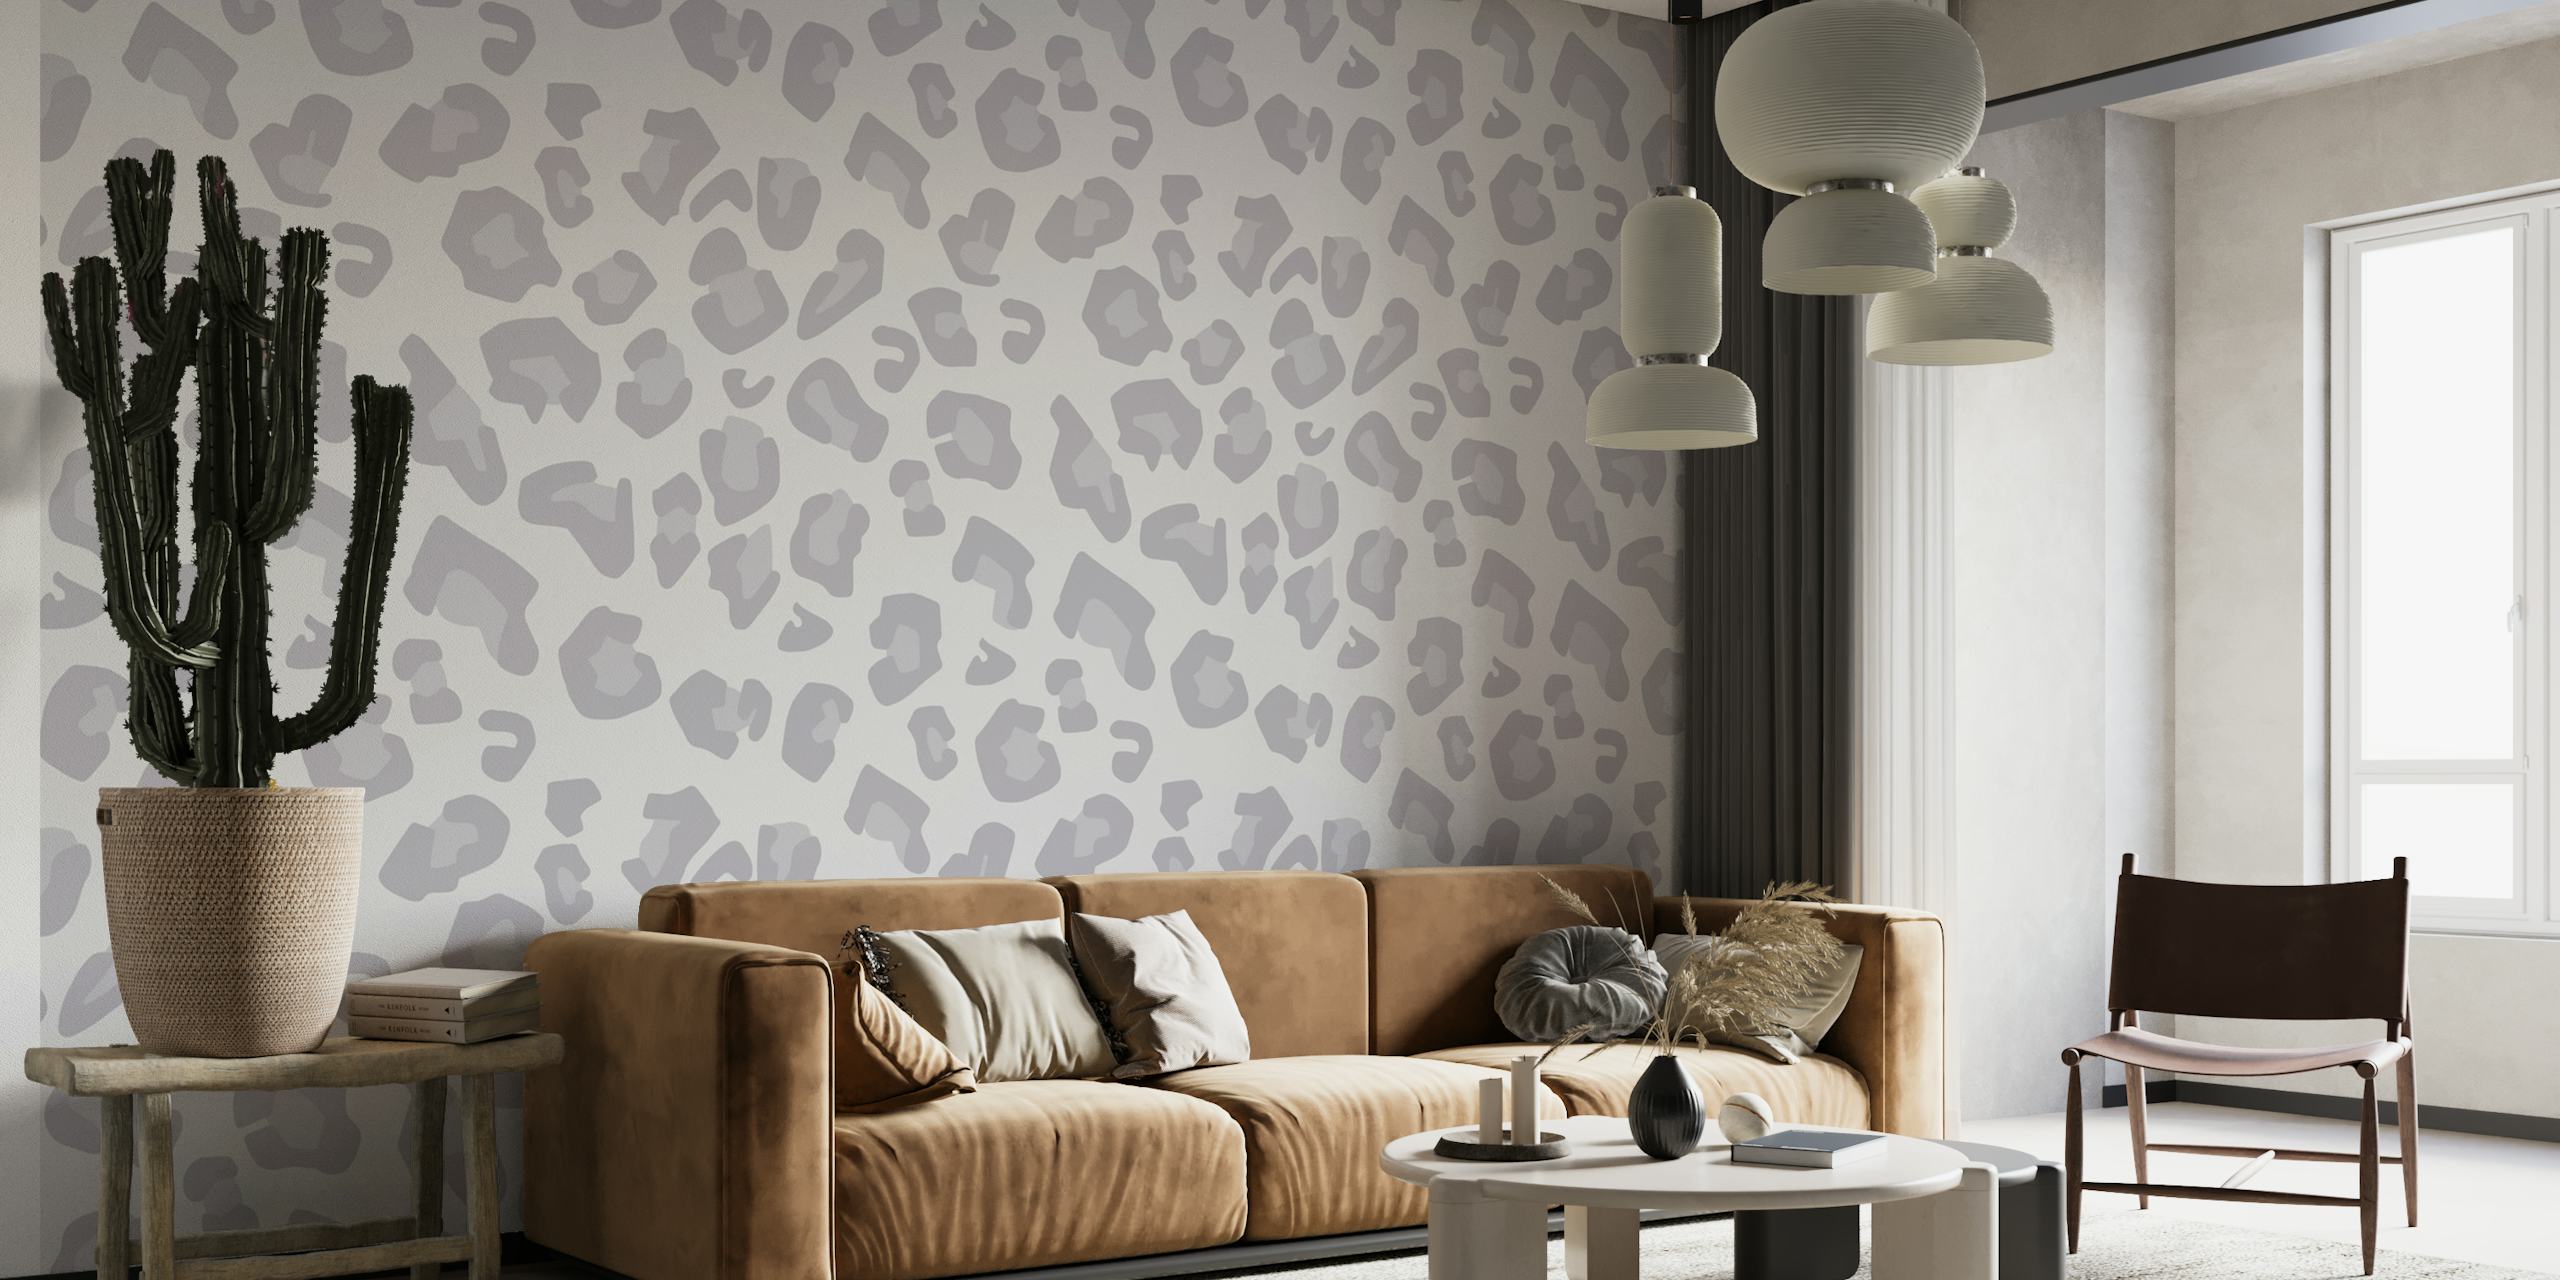 Modern Leopard Print Pale Gray wall mural with a subtle and sophisticated design